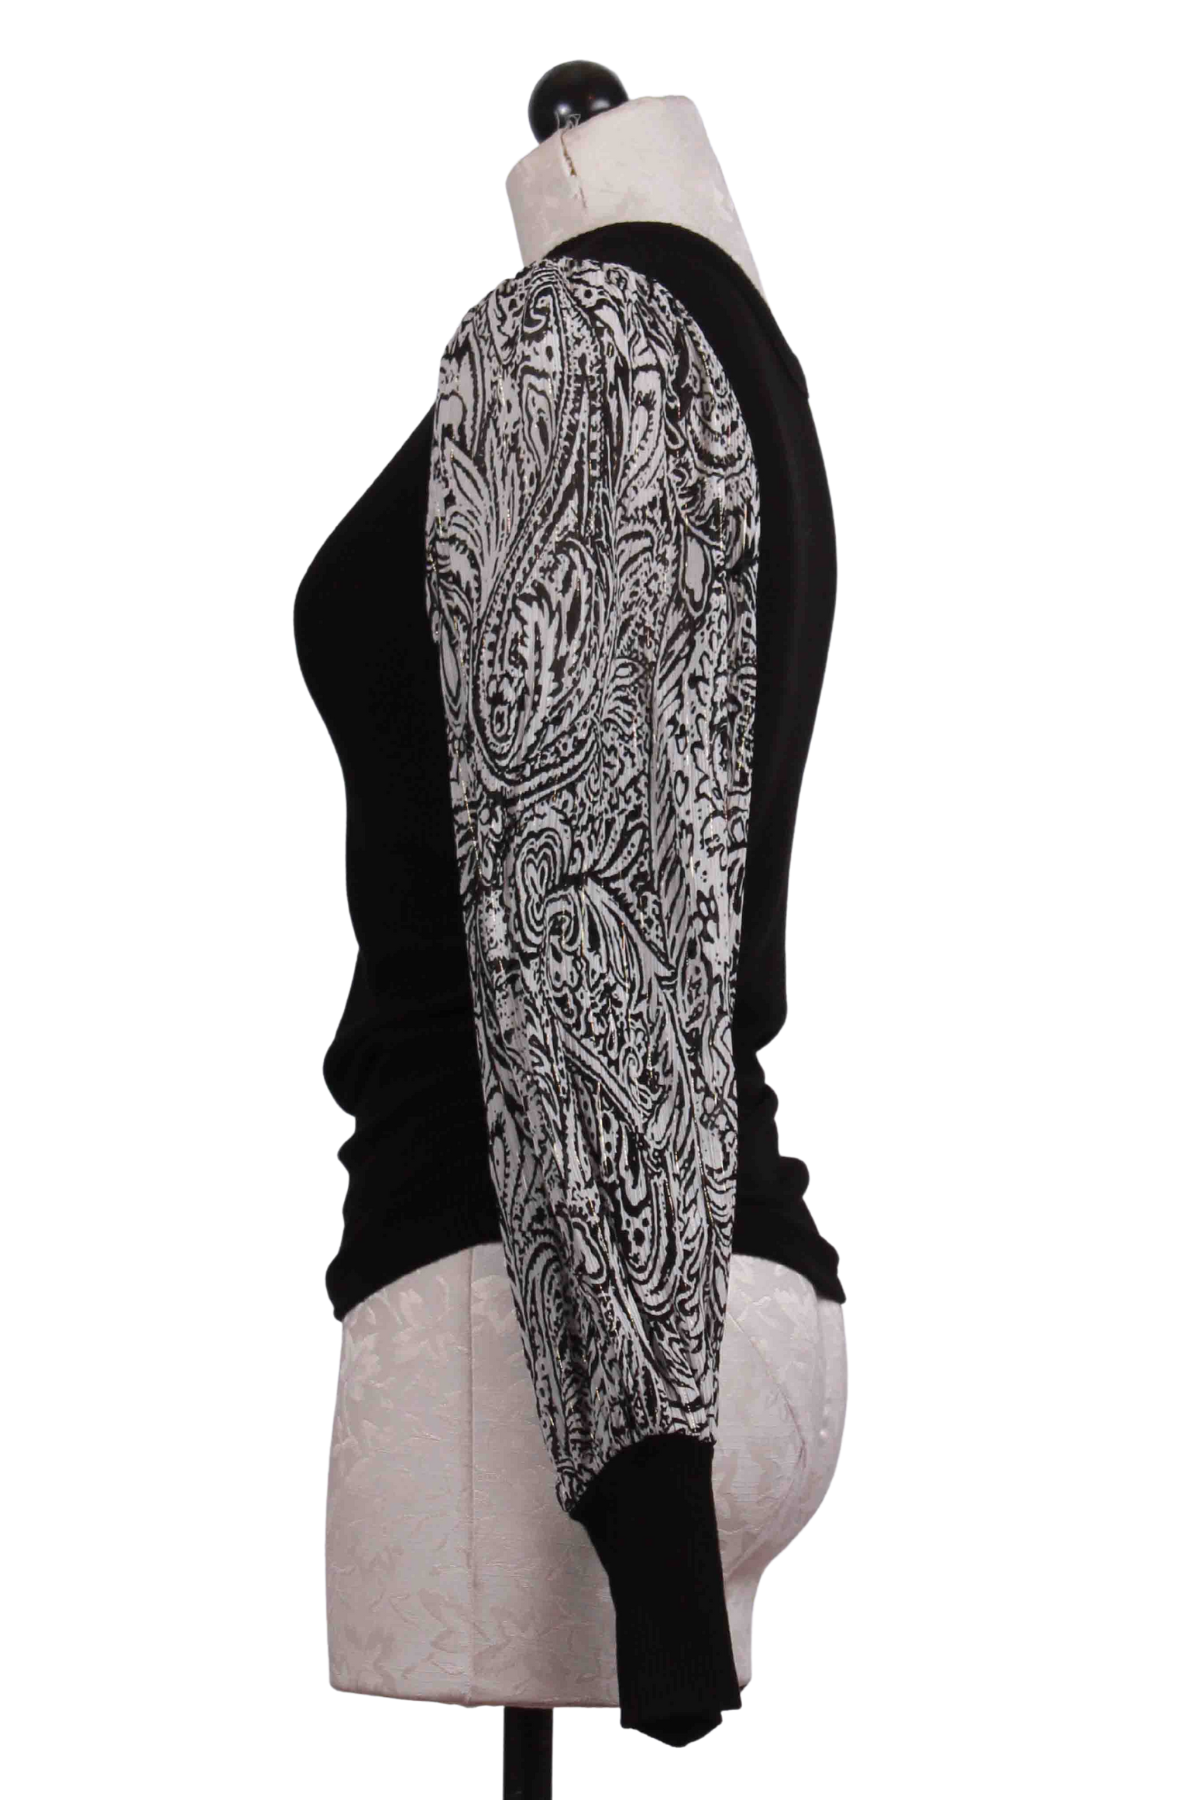 side view of Black Ribbed Body Top by Sheer Paisley Sleeves by Fifteen Twenty